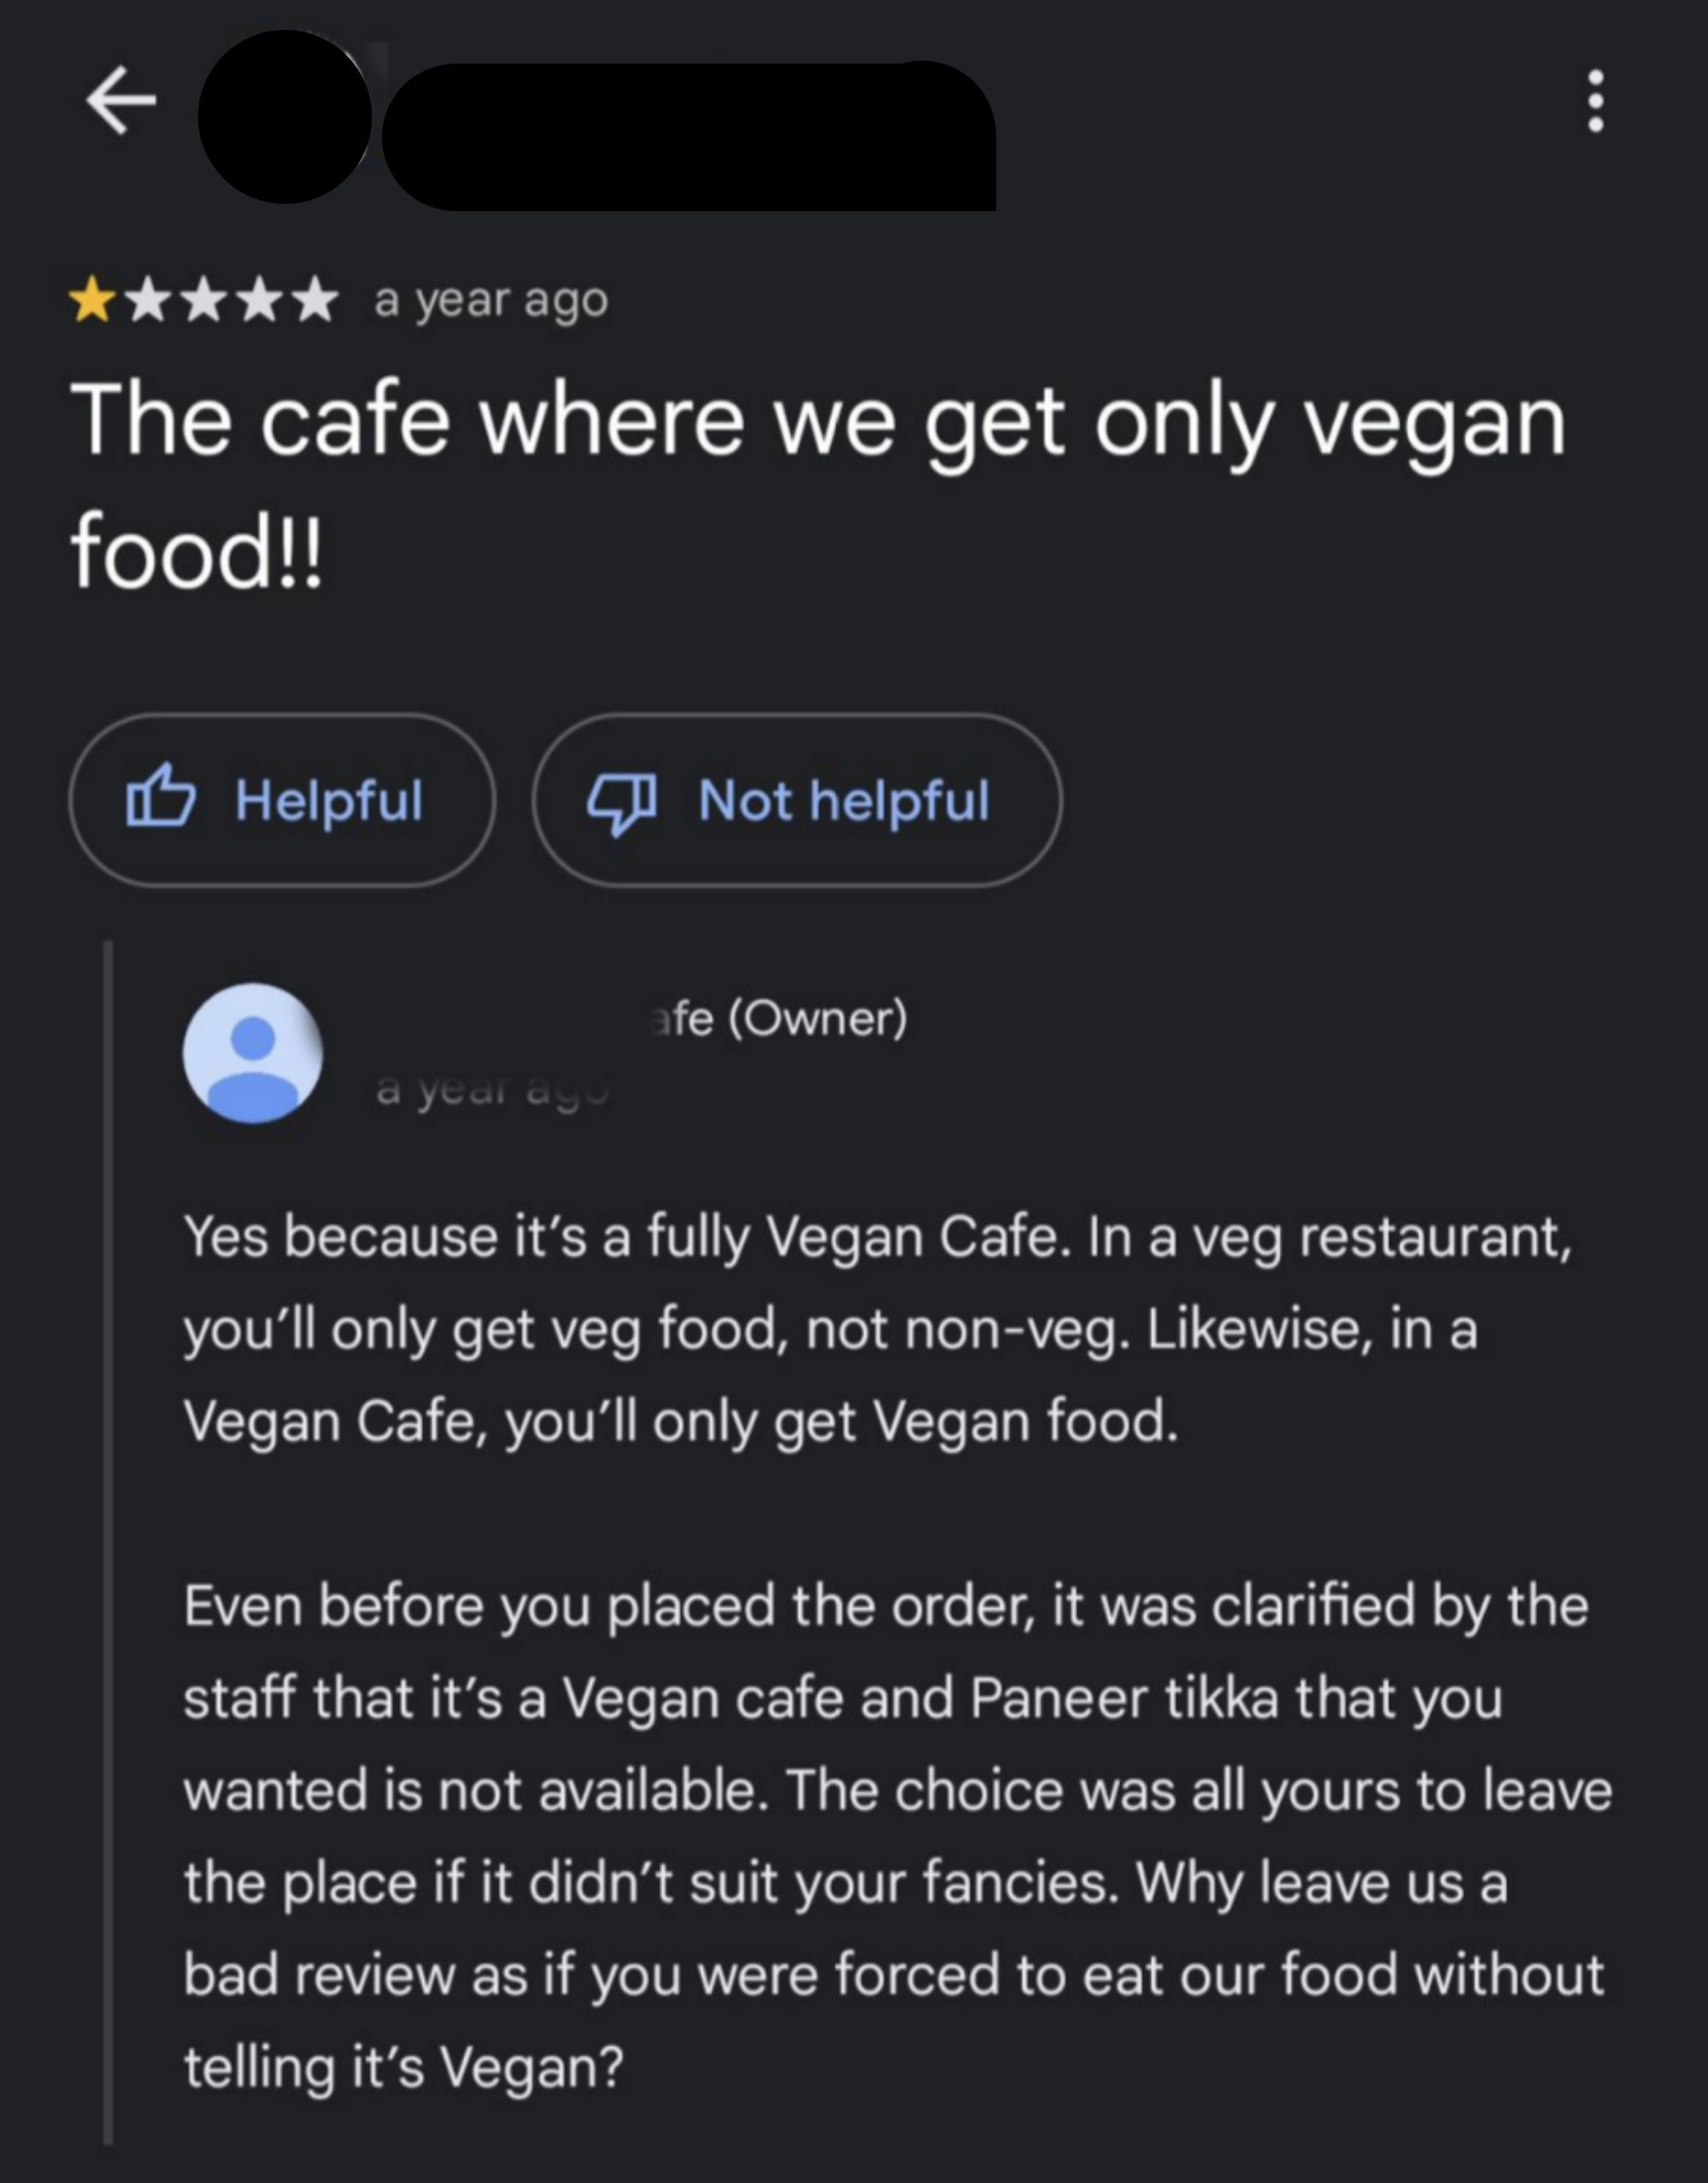 &quot;The cafe where we get only vegan food!&quot;